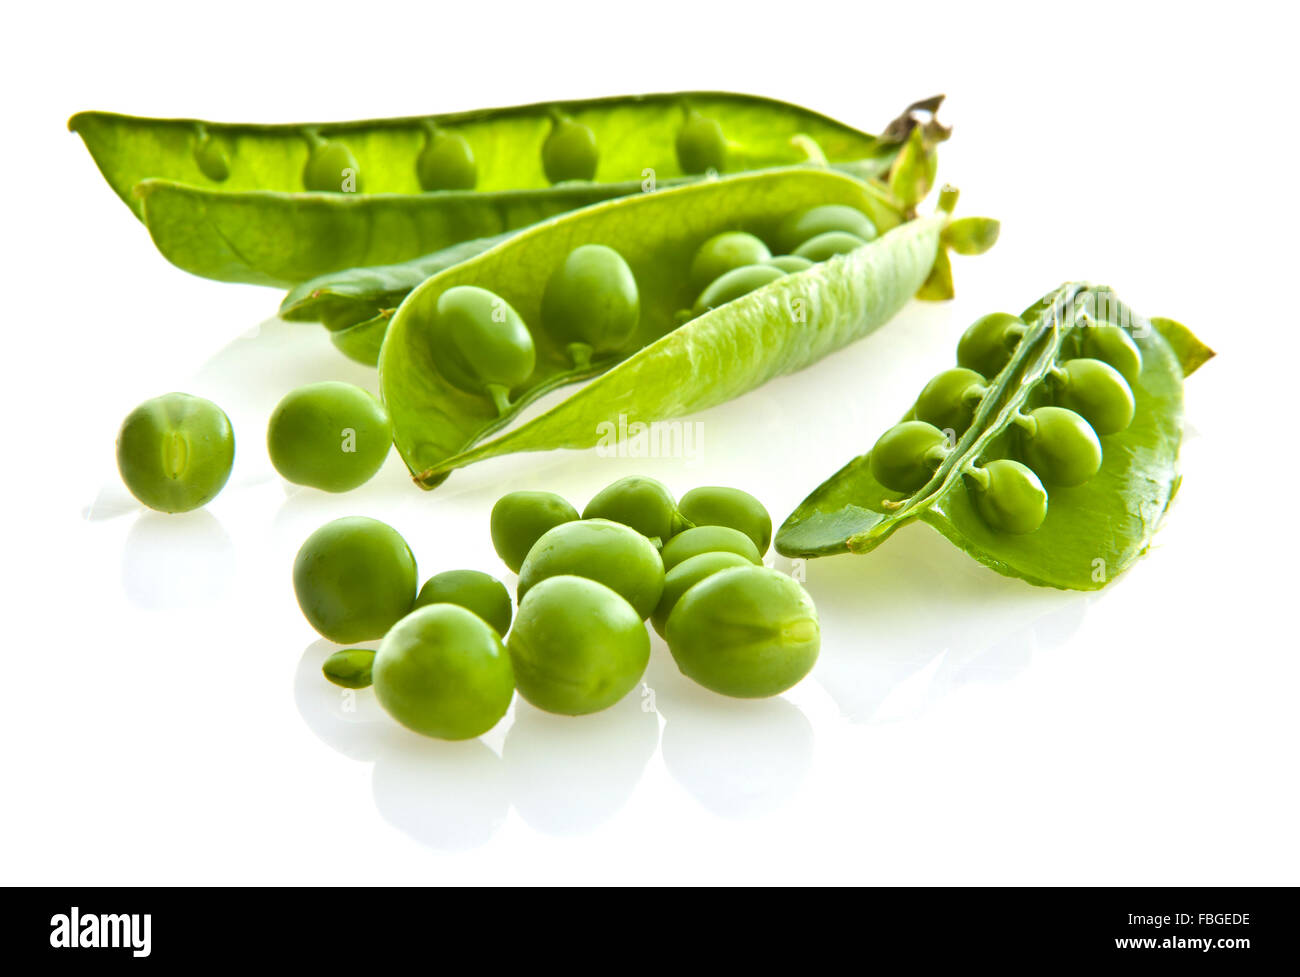 Fresh green pea pods and peas on white background. Stock Photo